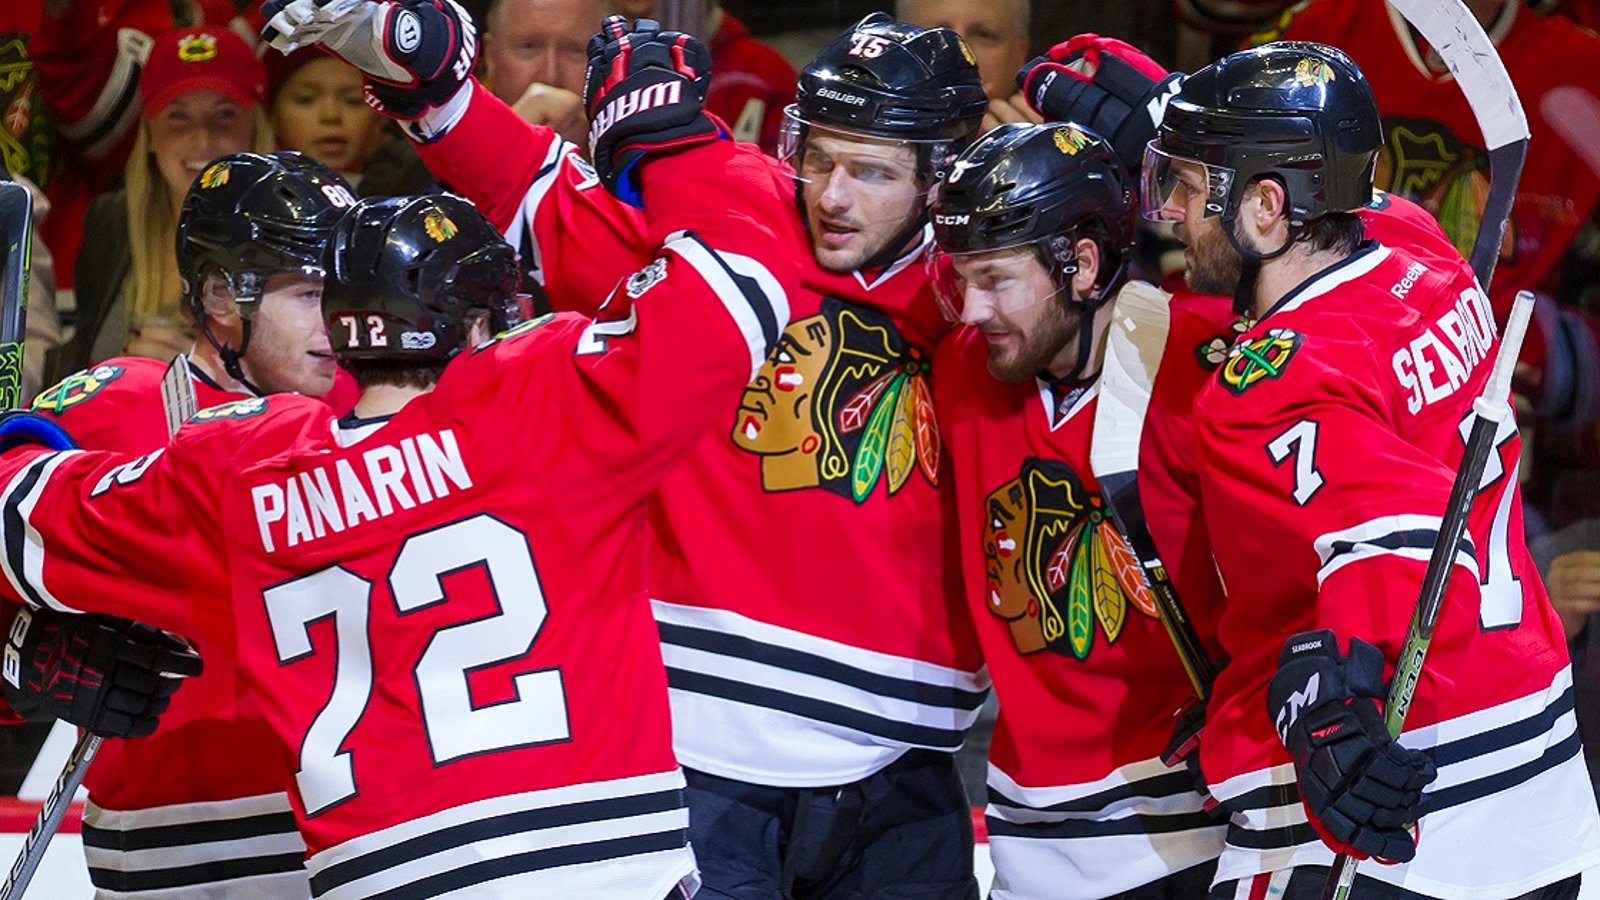 Rumor: 50% chance we see a major change on the Blackhawks roster.